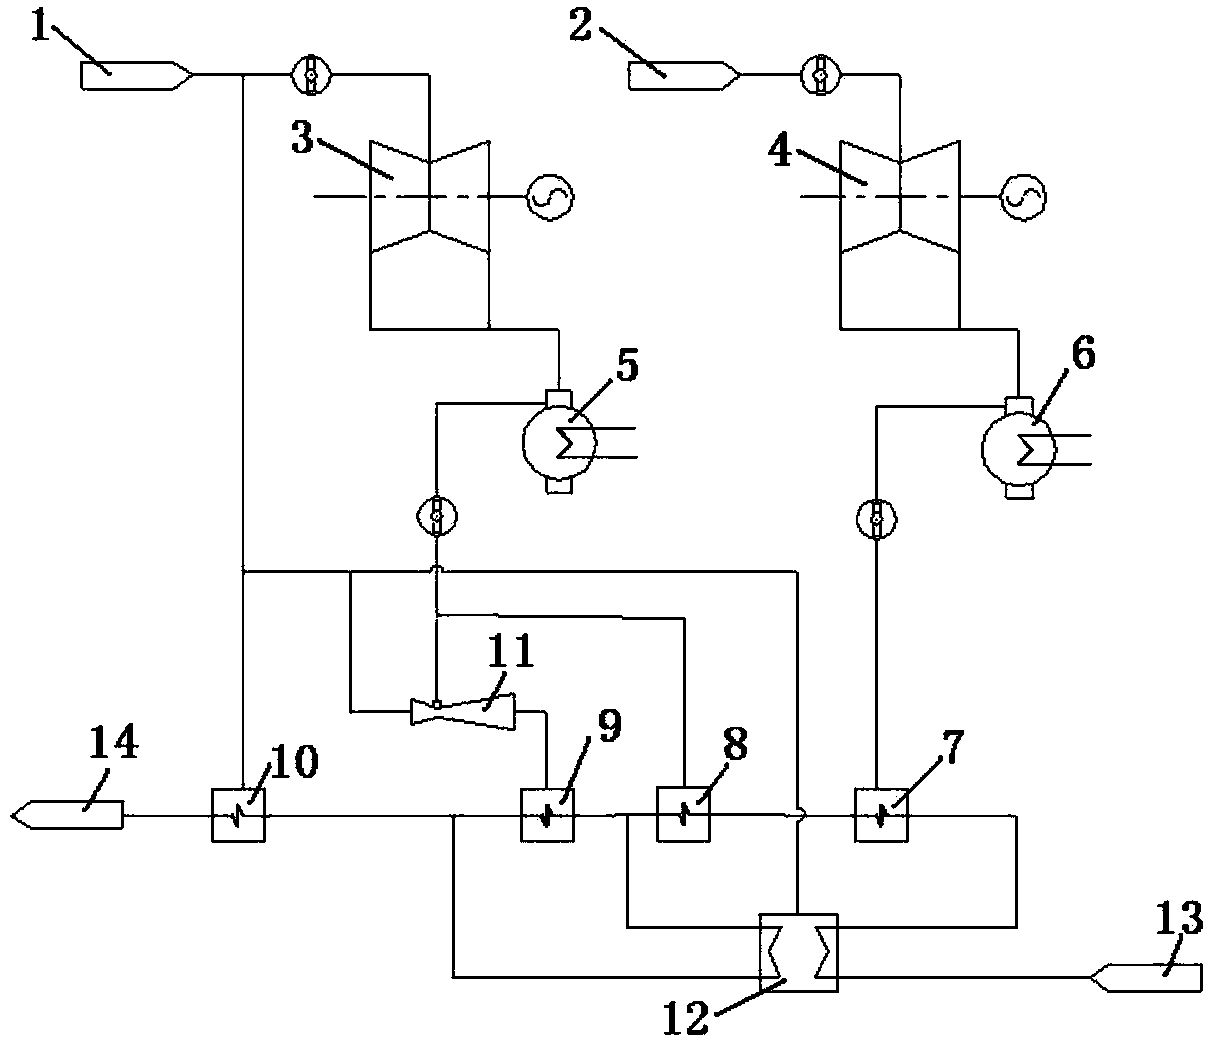 Thermal power plant thermoelectric decoupling system